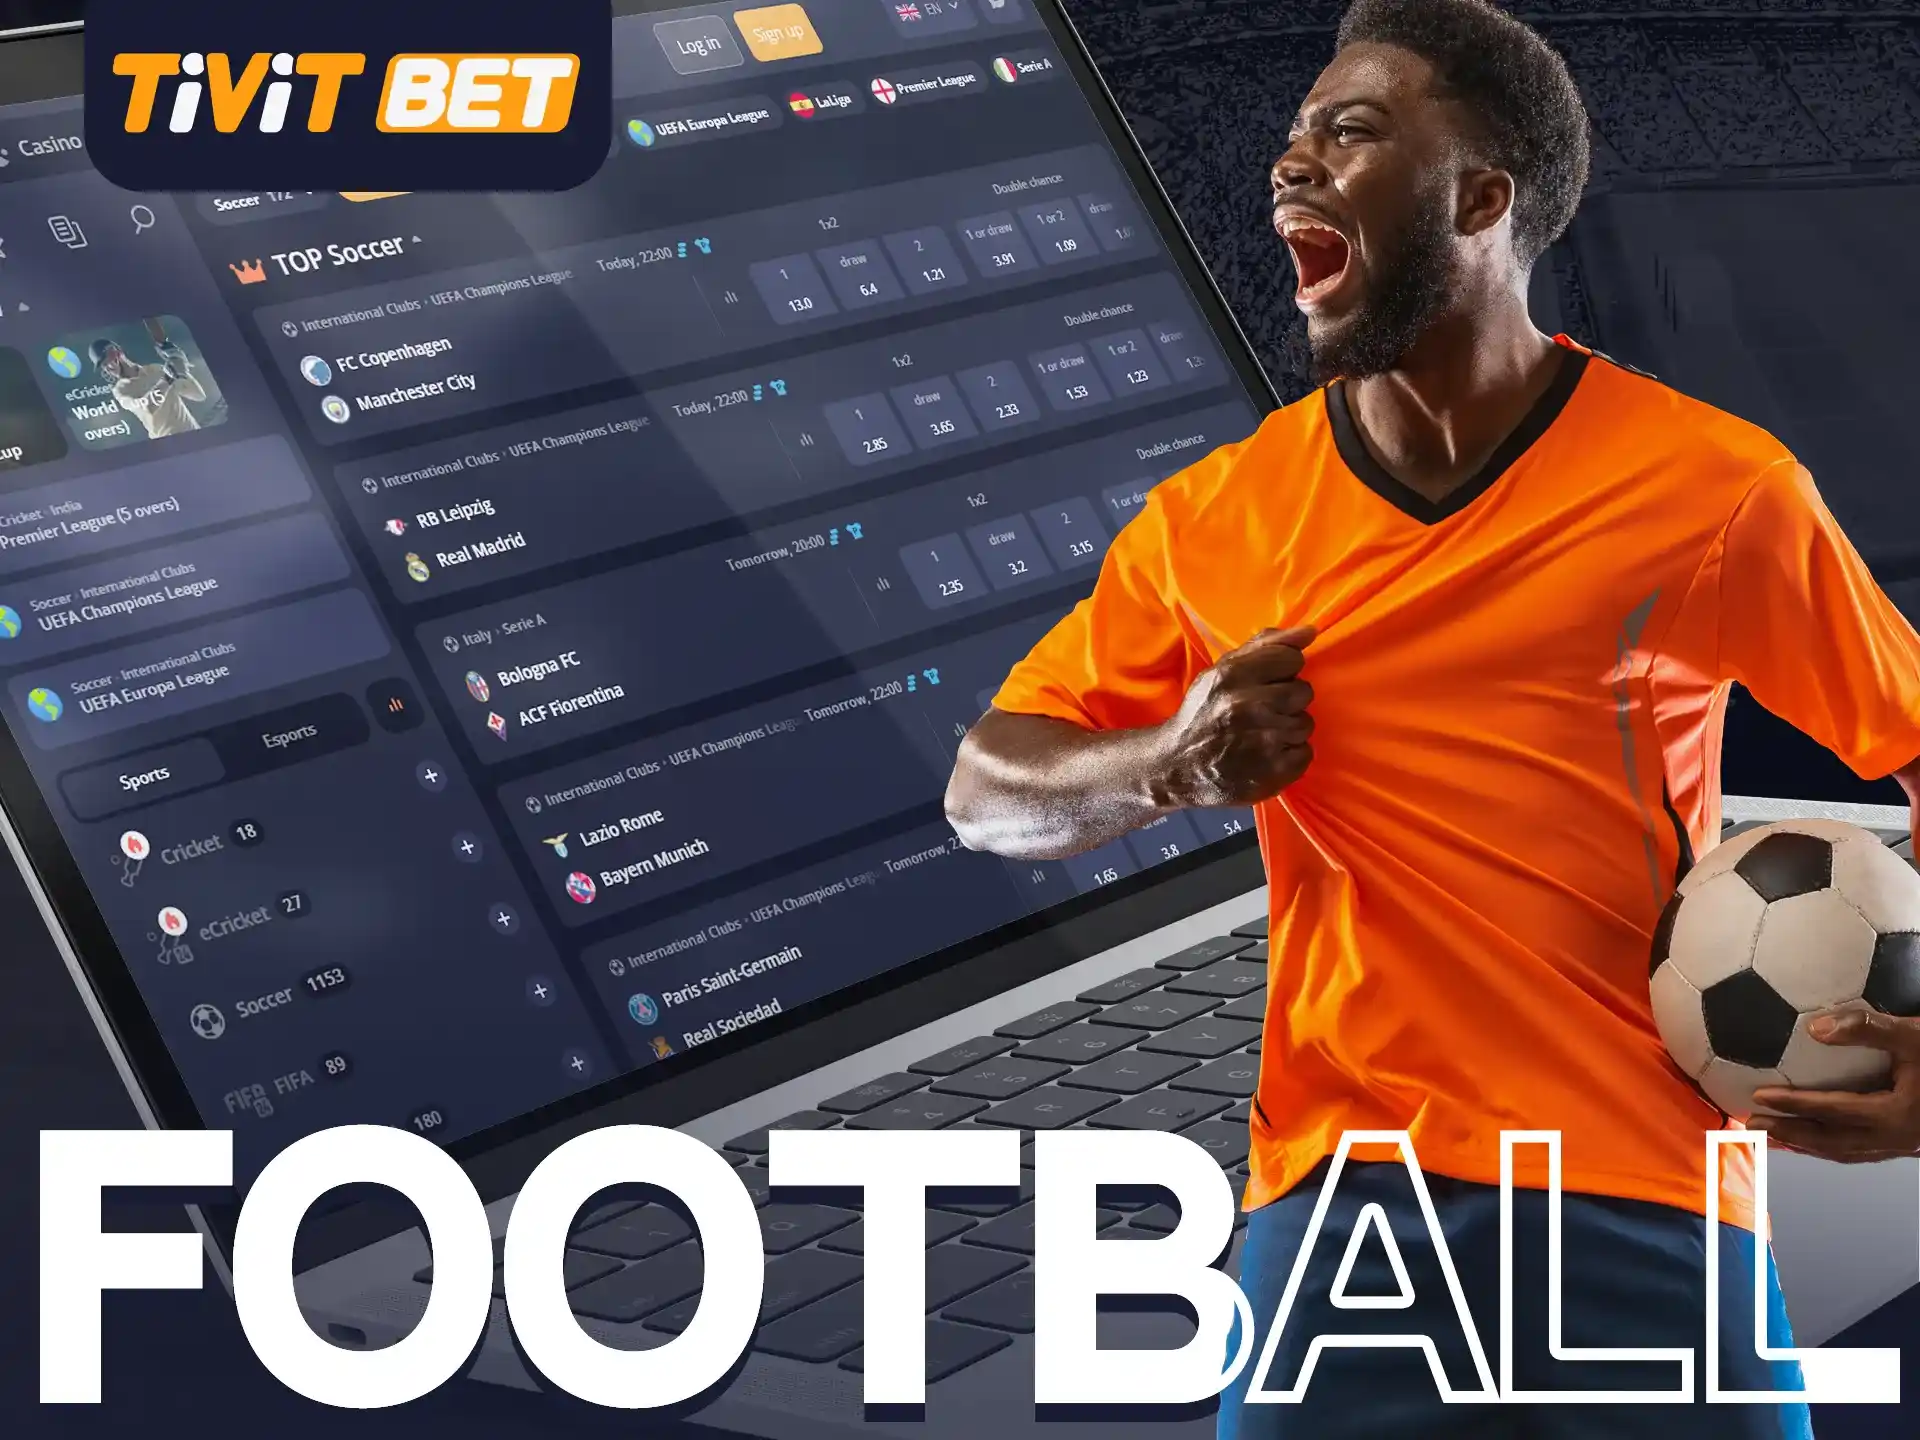 The Tivit Bet website features a football section for betting.